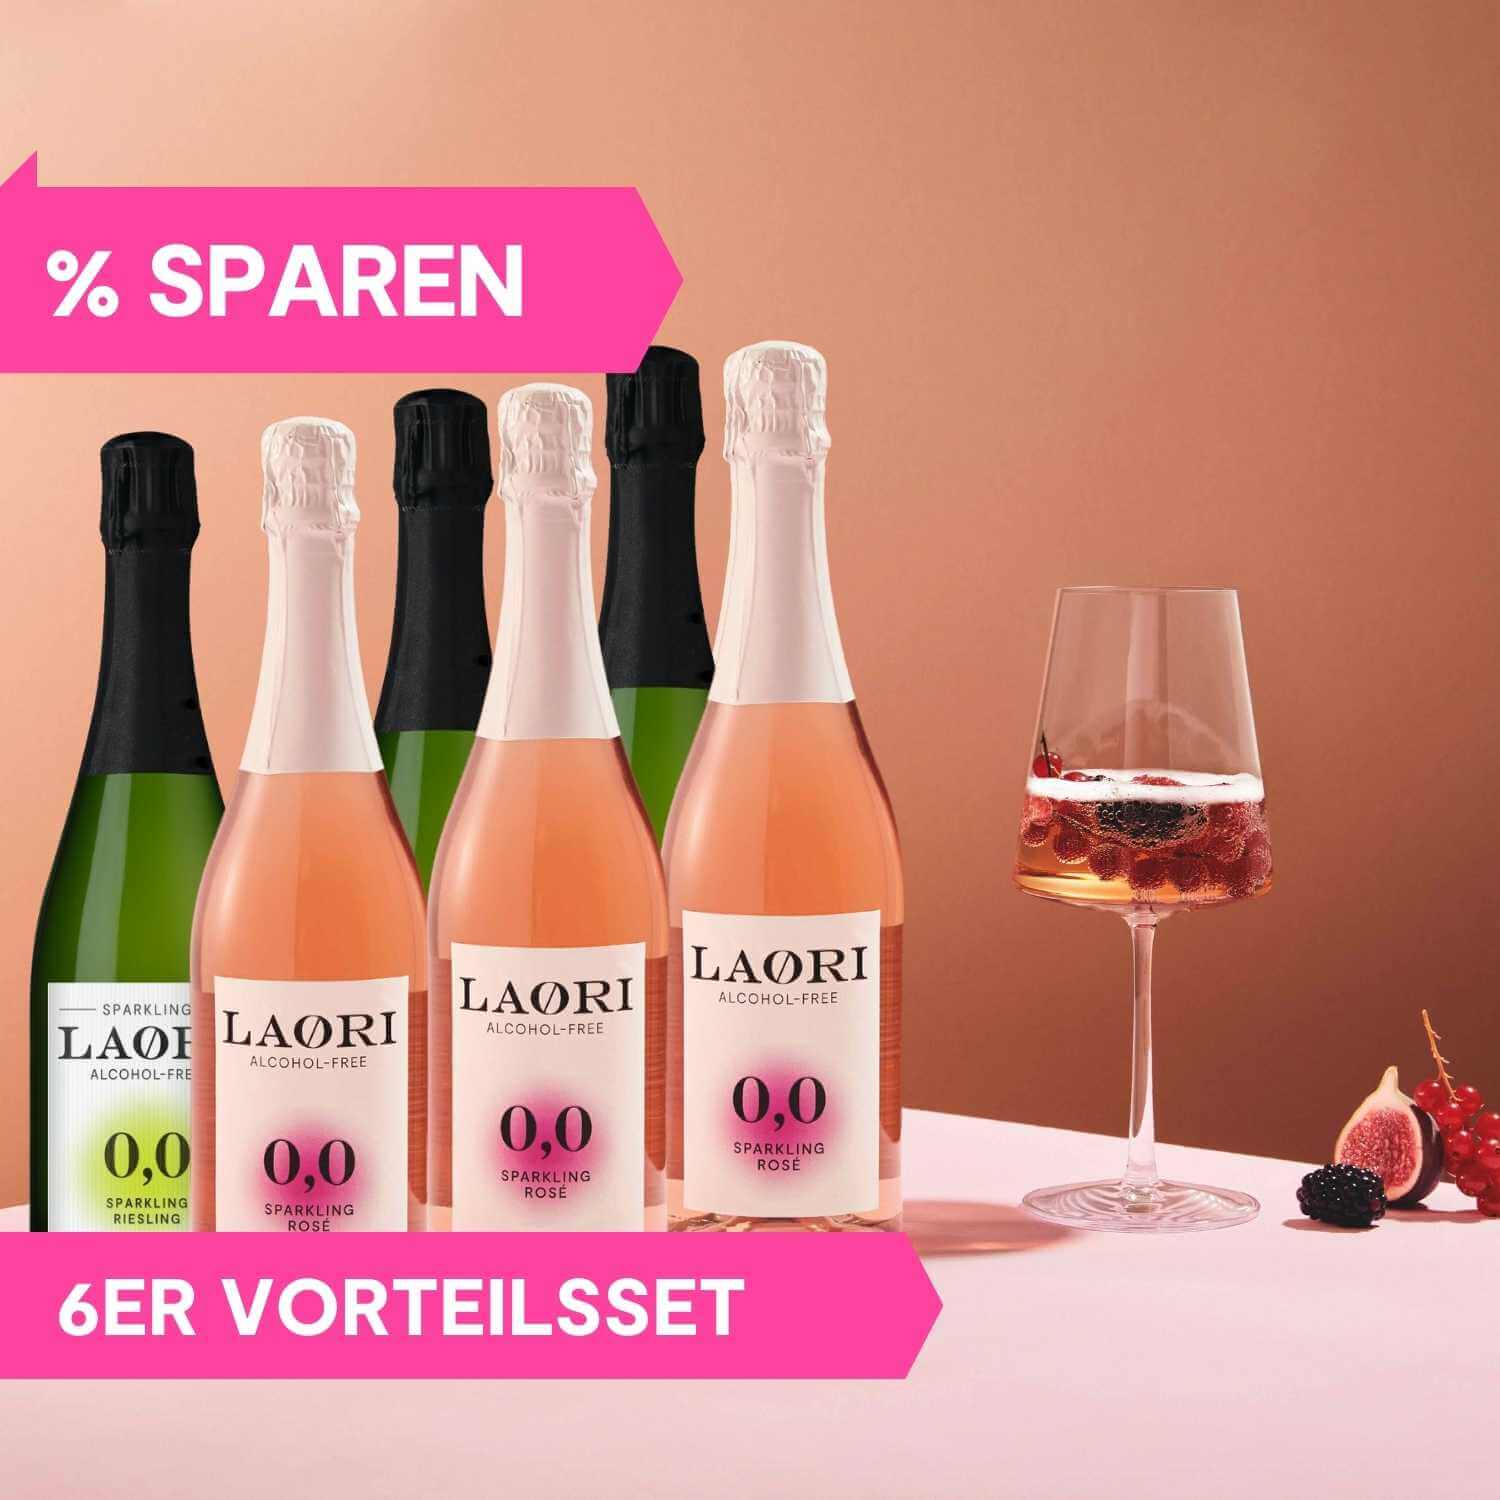 Ultimate Collection X 6: 3x Sparkling Riesling + 3x Sparkling Rosé (0.75L)